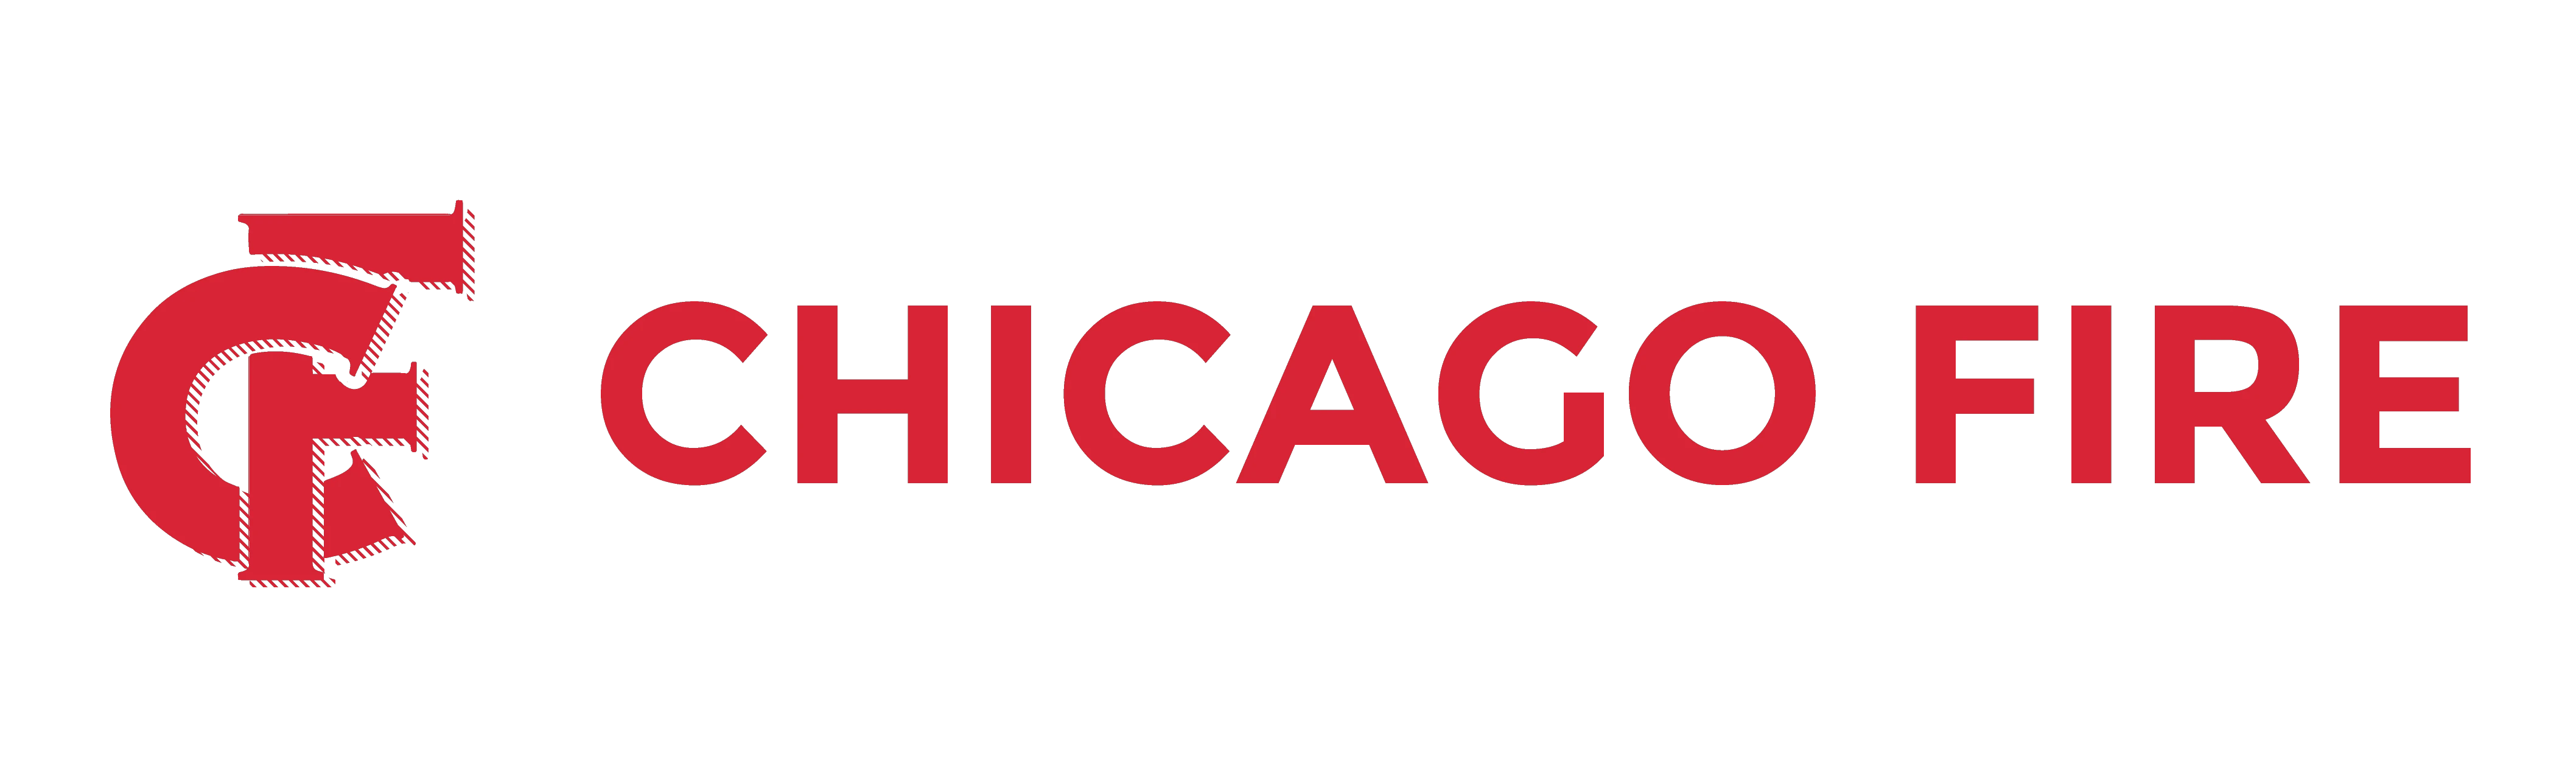 Chicago Fire 2 For 1 & Promo Codes